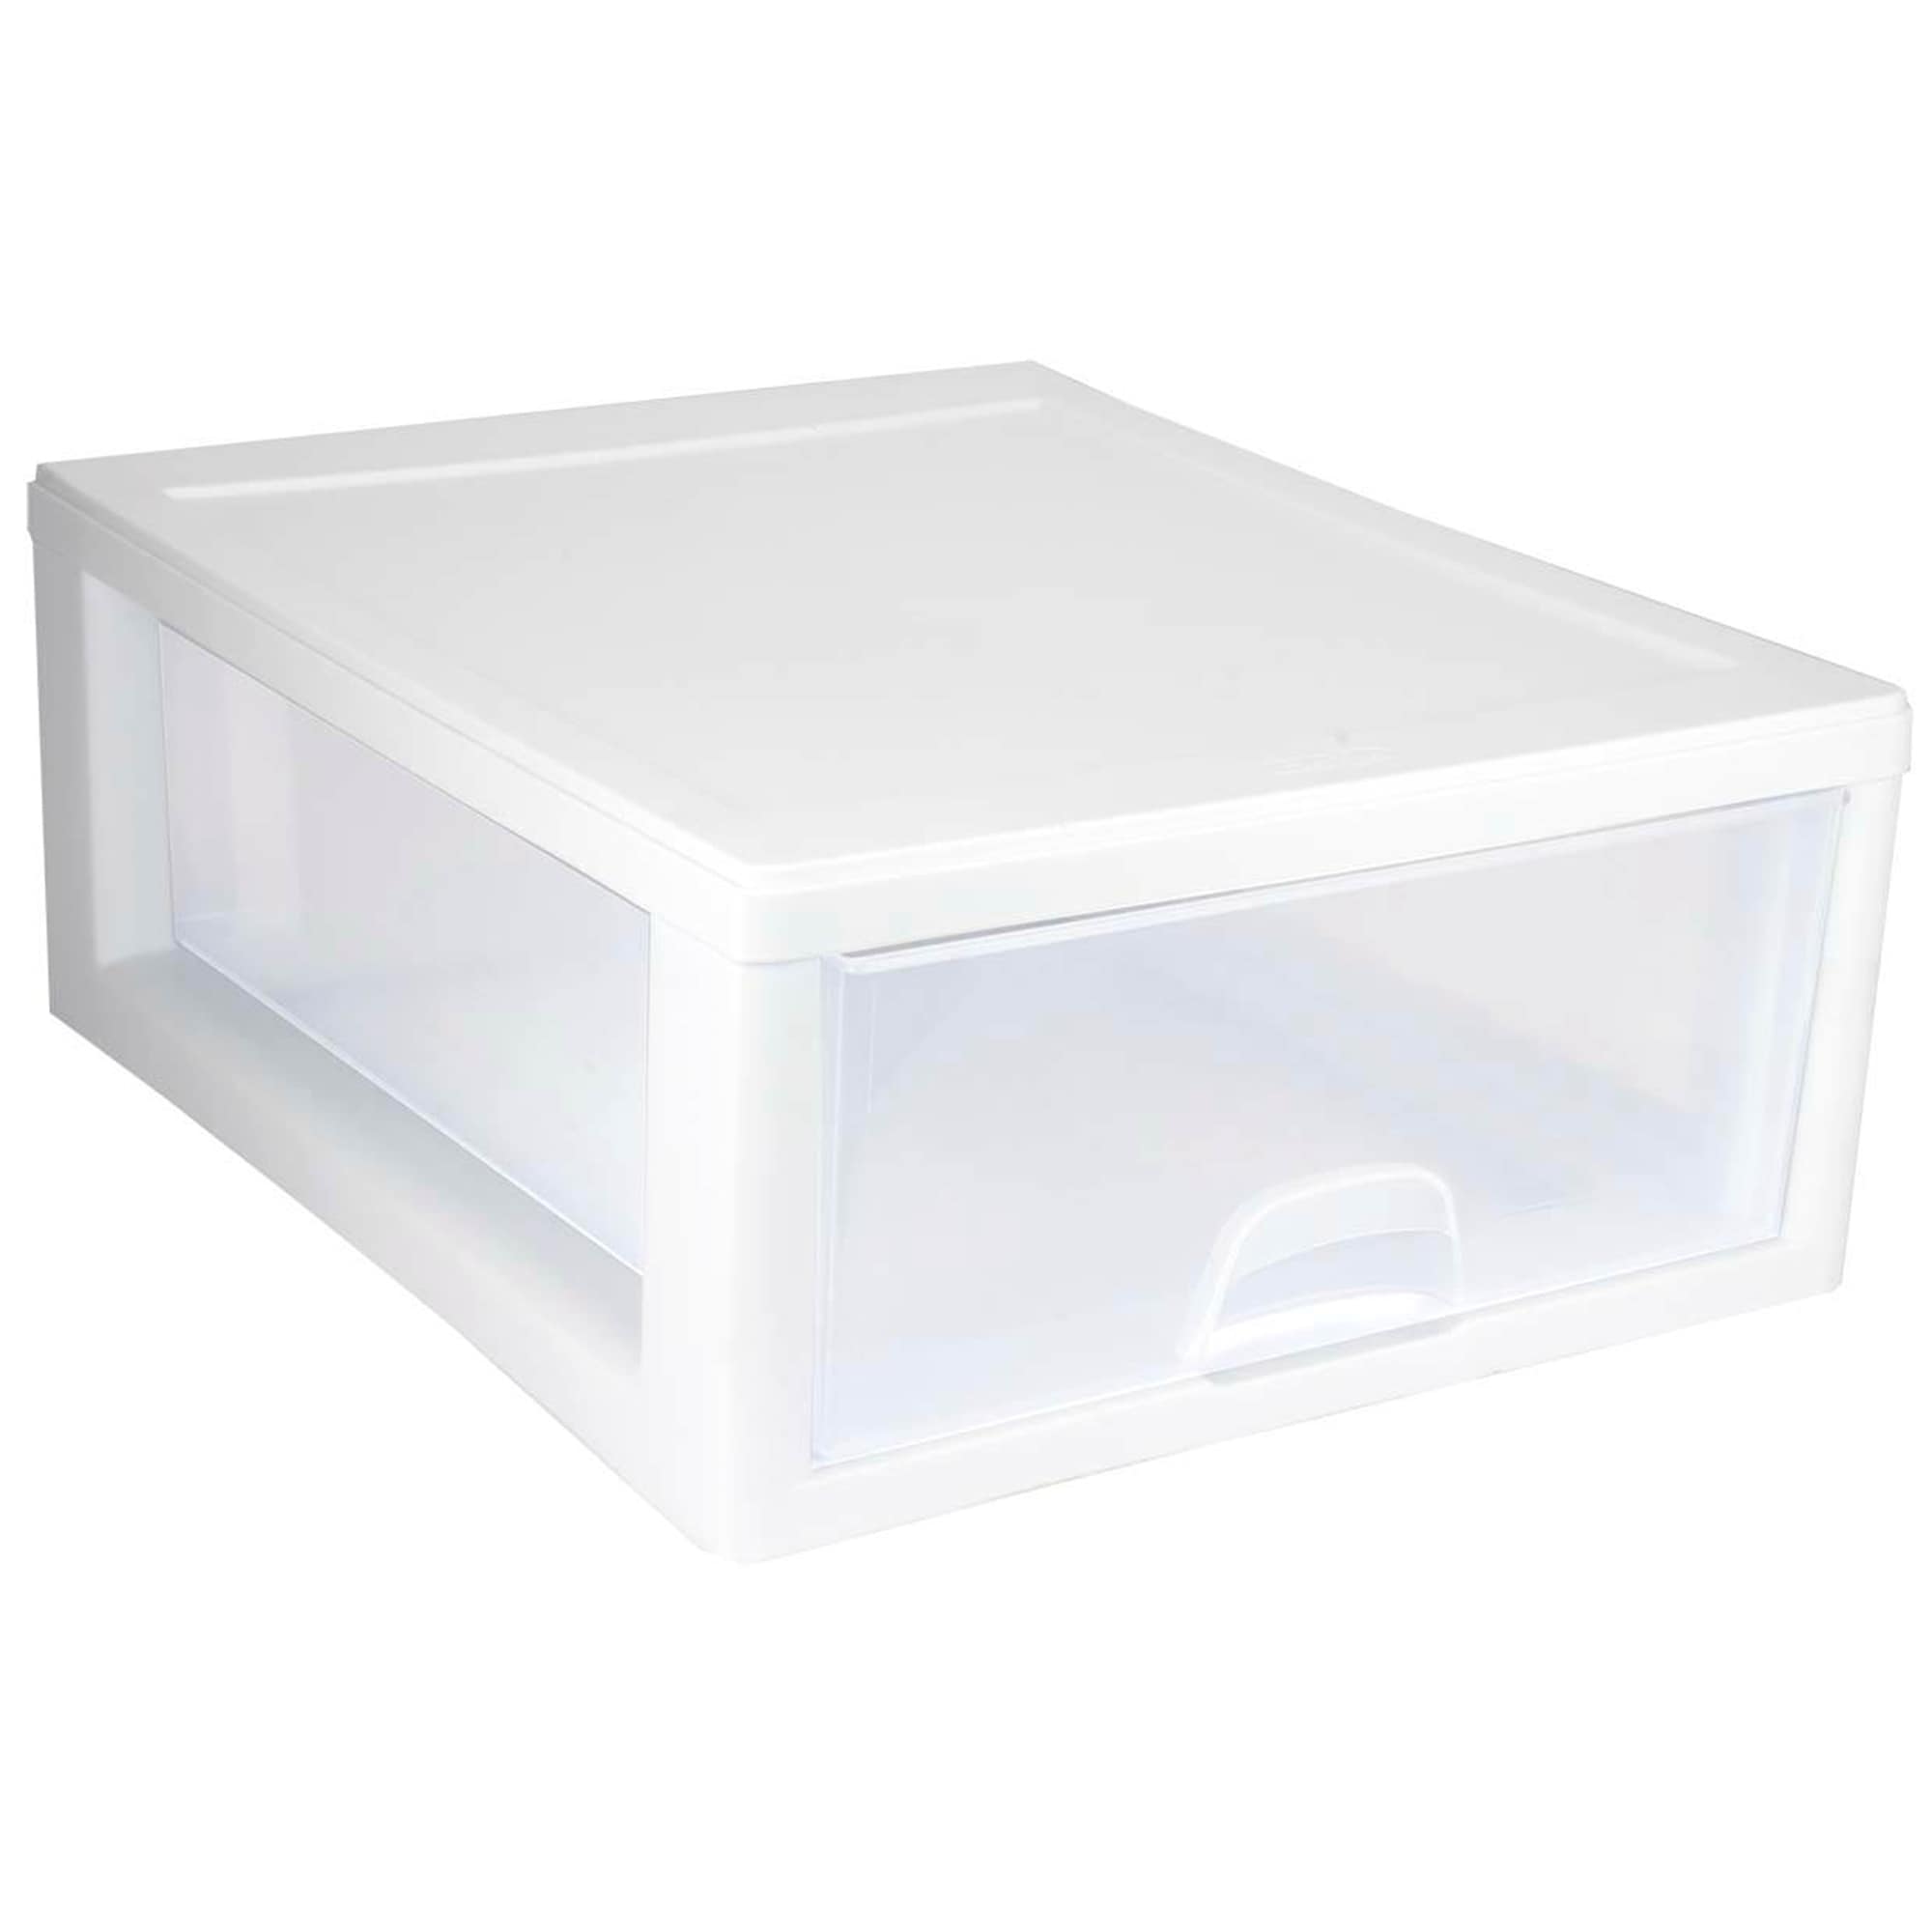 https://ak1.ostkcdn.com/images/products/is/images/direct/45c8542d4cb7768becd83ac5fc3eda48e2d6a181/Sterilite-16-Qt-Single-Box-Modular-Stacking-Storage-Drawer-Container-%2824-Pack%29.jpg